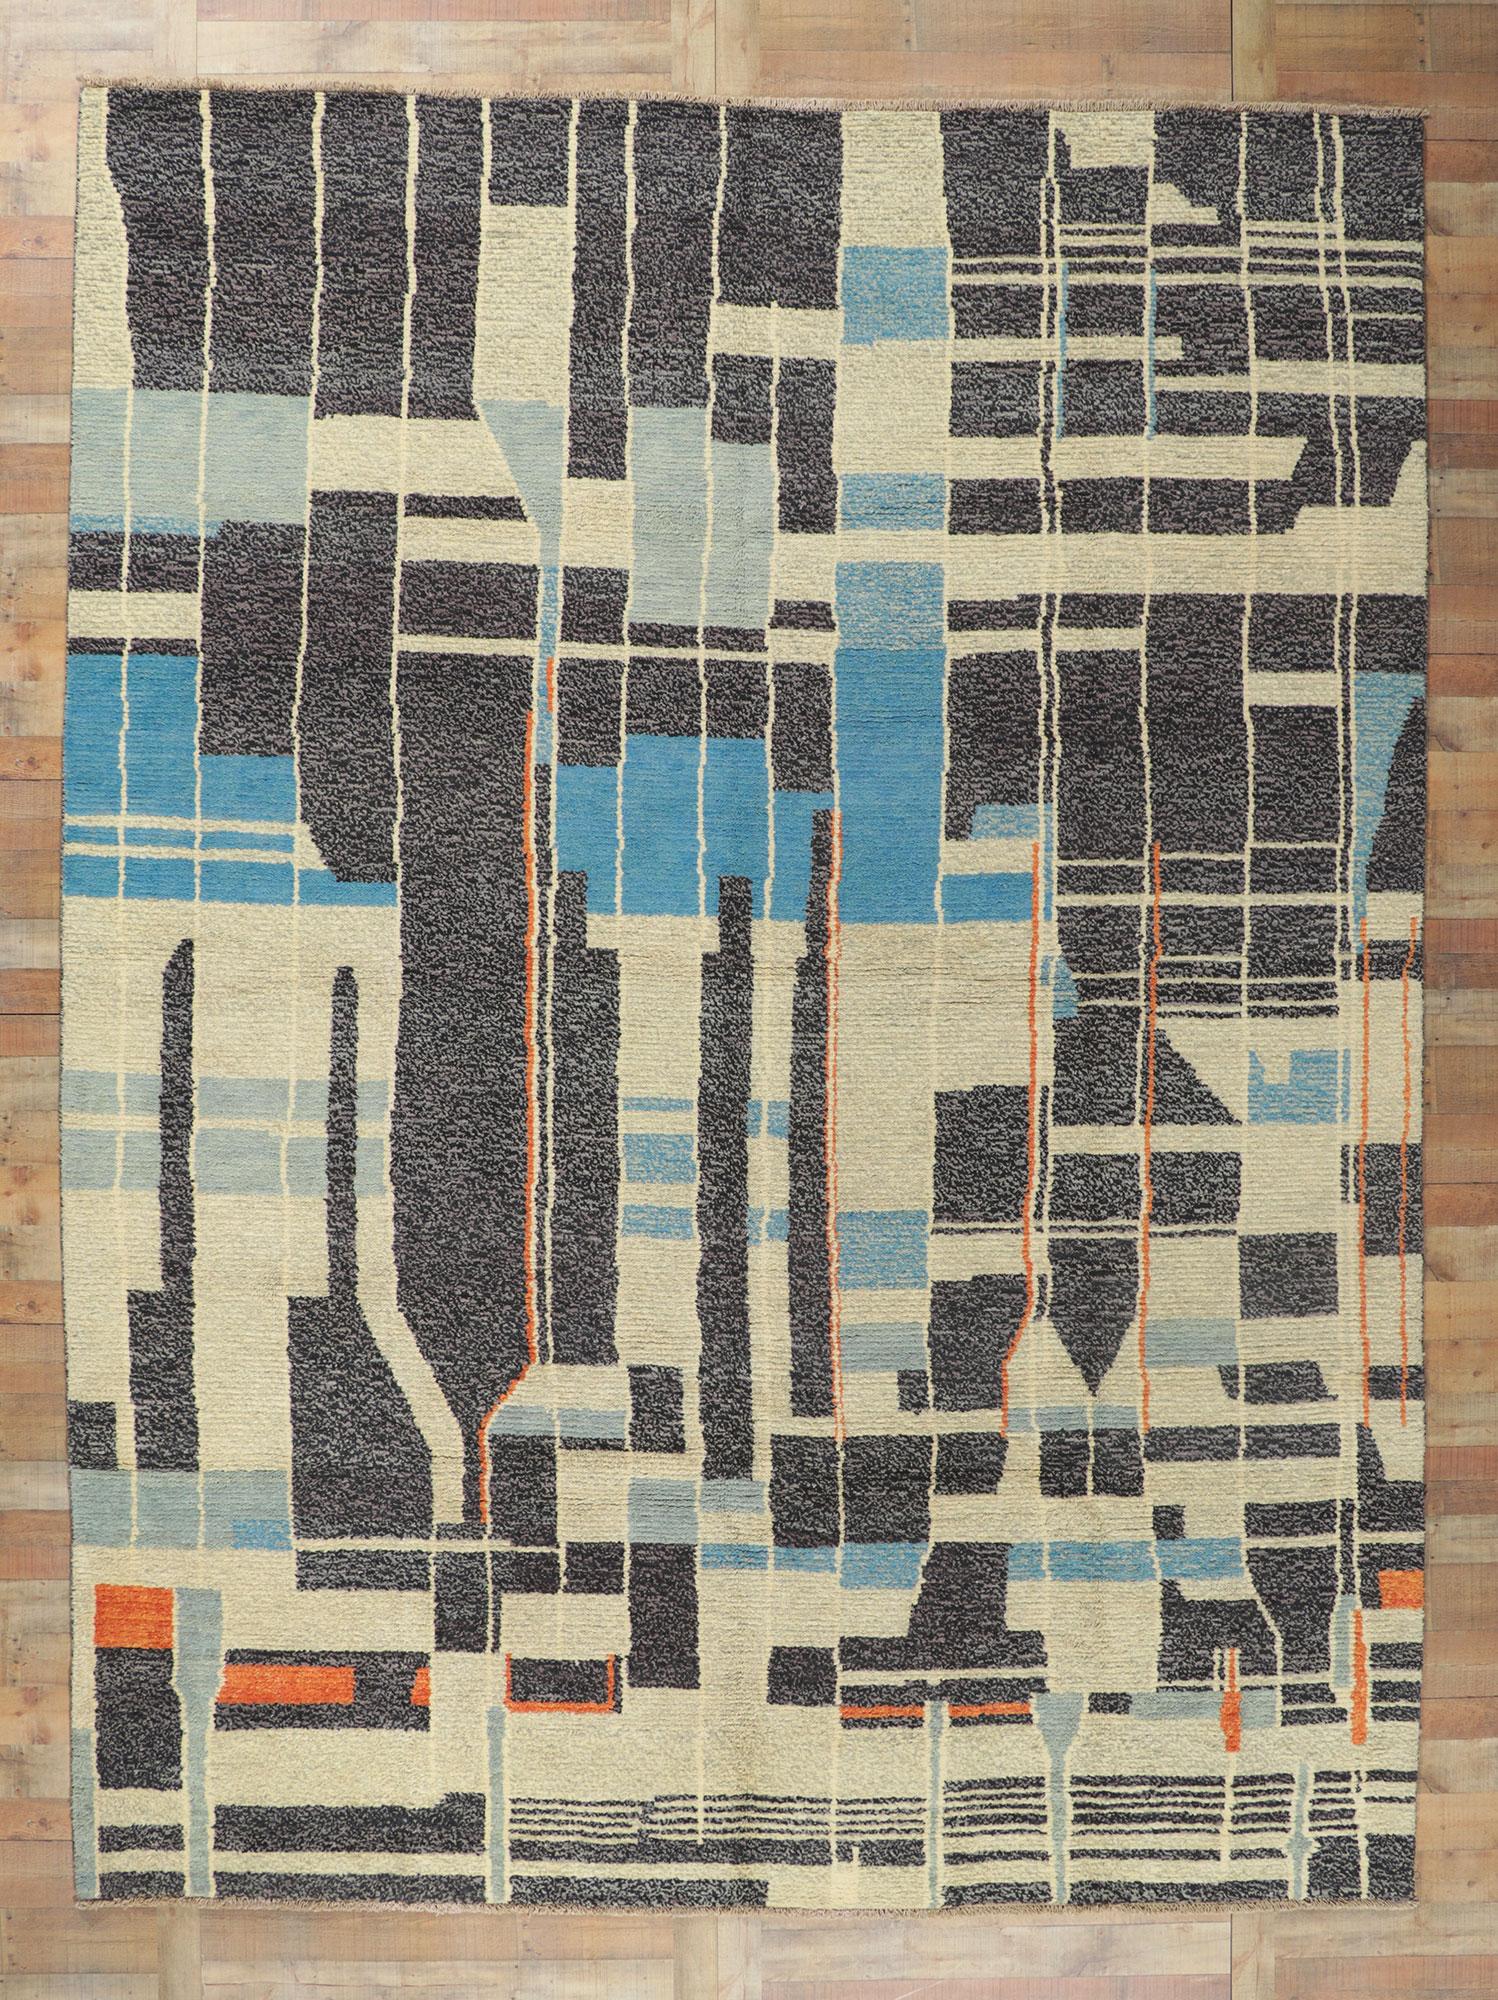 80697 Modern Moroccan Color Block Rug Inspired by Gunta Stolzl, 10'05 x 13'10. Presenting a resplendent testament to artistic audacity and daring creativity, this hand-knotted wool modern Moroccan area rug evokes the spirit of Cubism with its